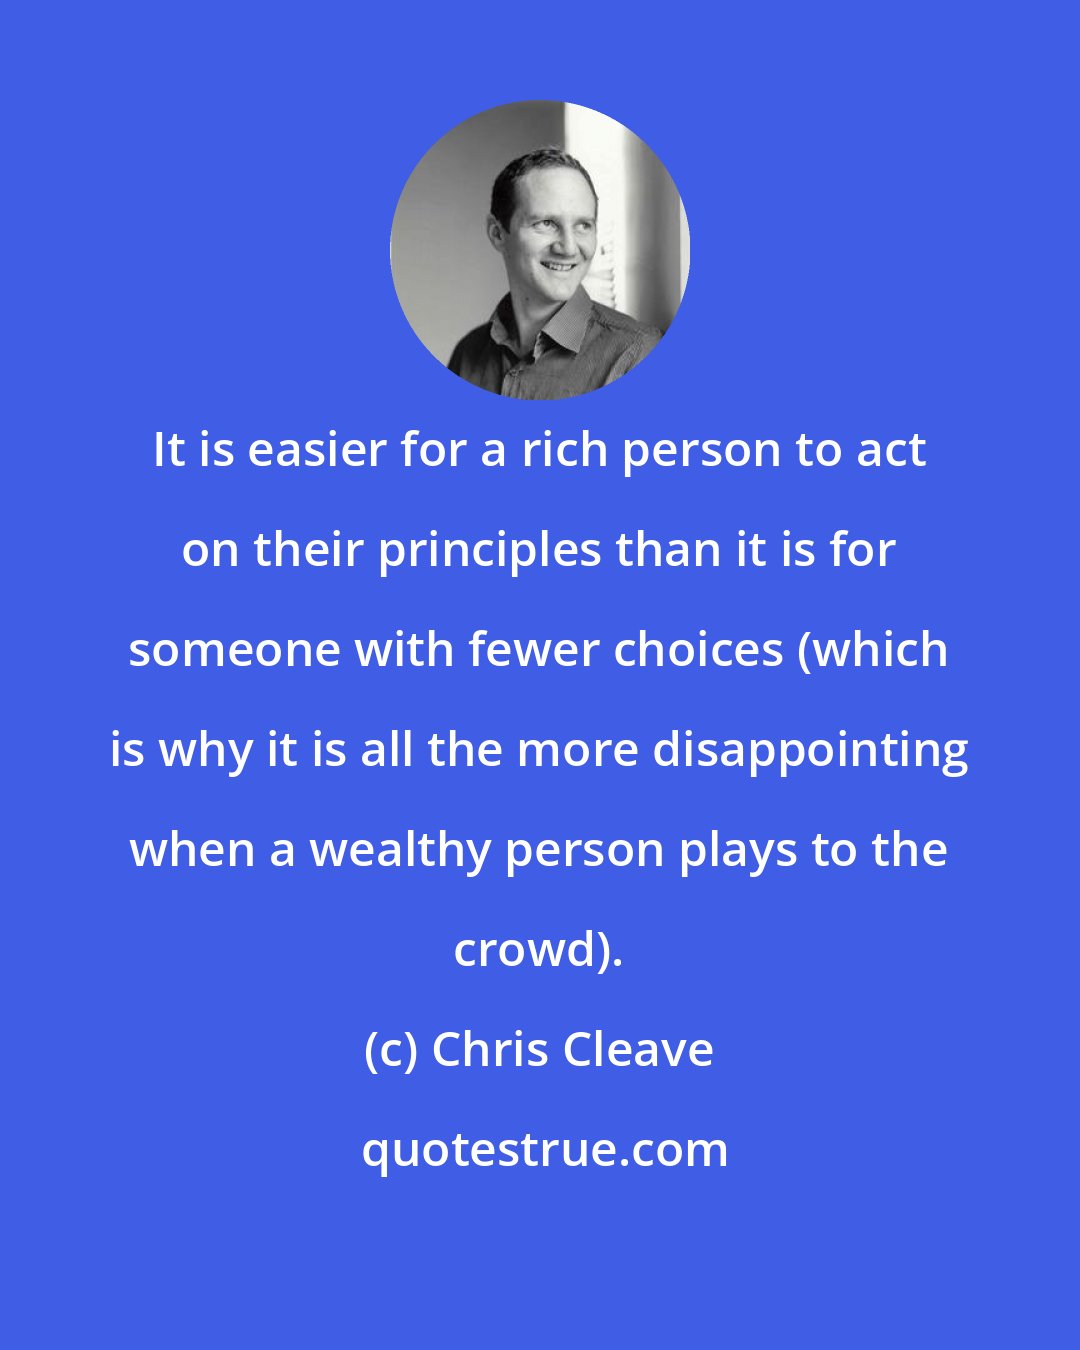 Chris Cleave: It is easier for a rich person to act on their principles than it is for someone with fewer choices (which is why it is all the more disappointing when a wealthy person plays to the crowd).